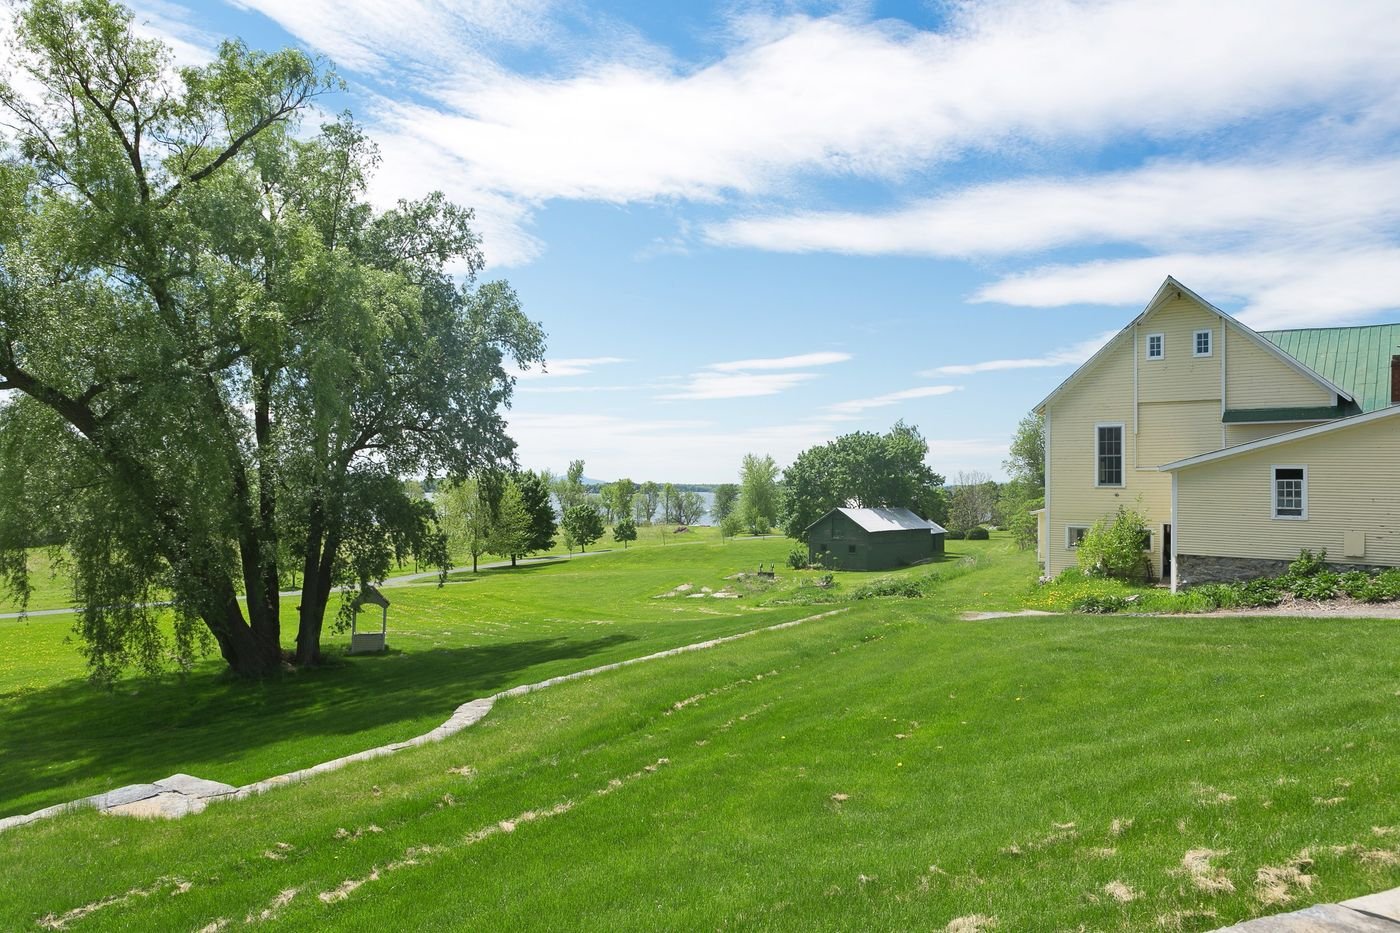 Francis York This New England Estate Comes with a Restored 18th Century Farmhouse and Entertainment Barns 11.jpeg